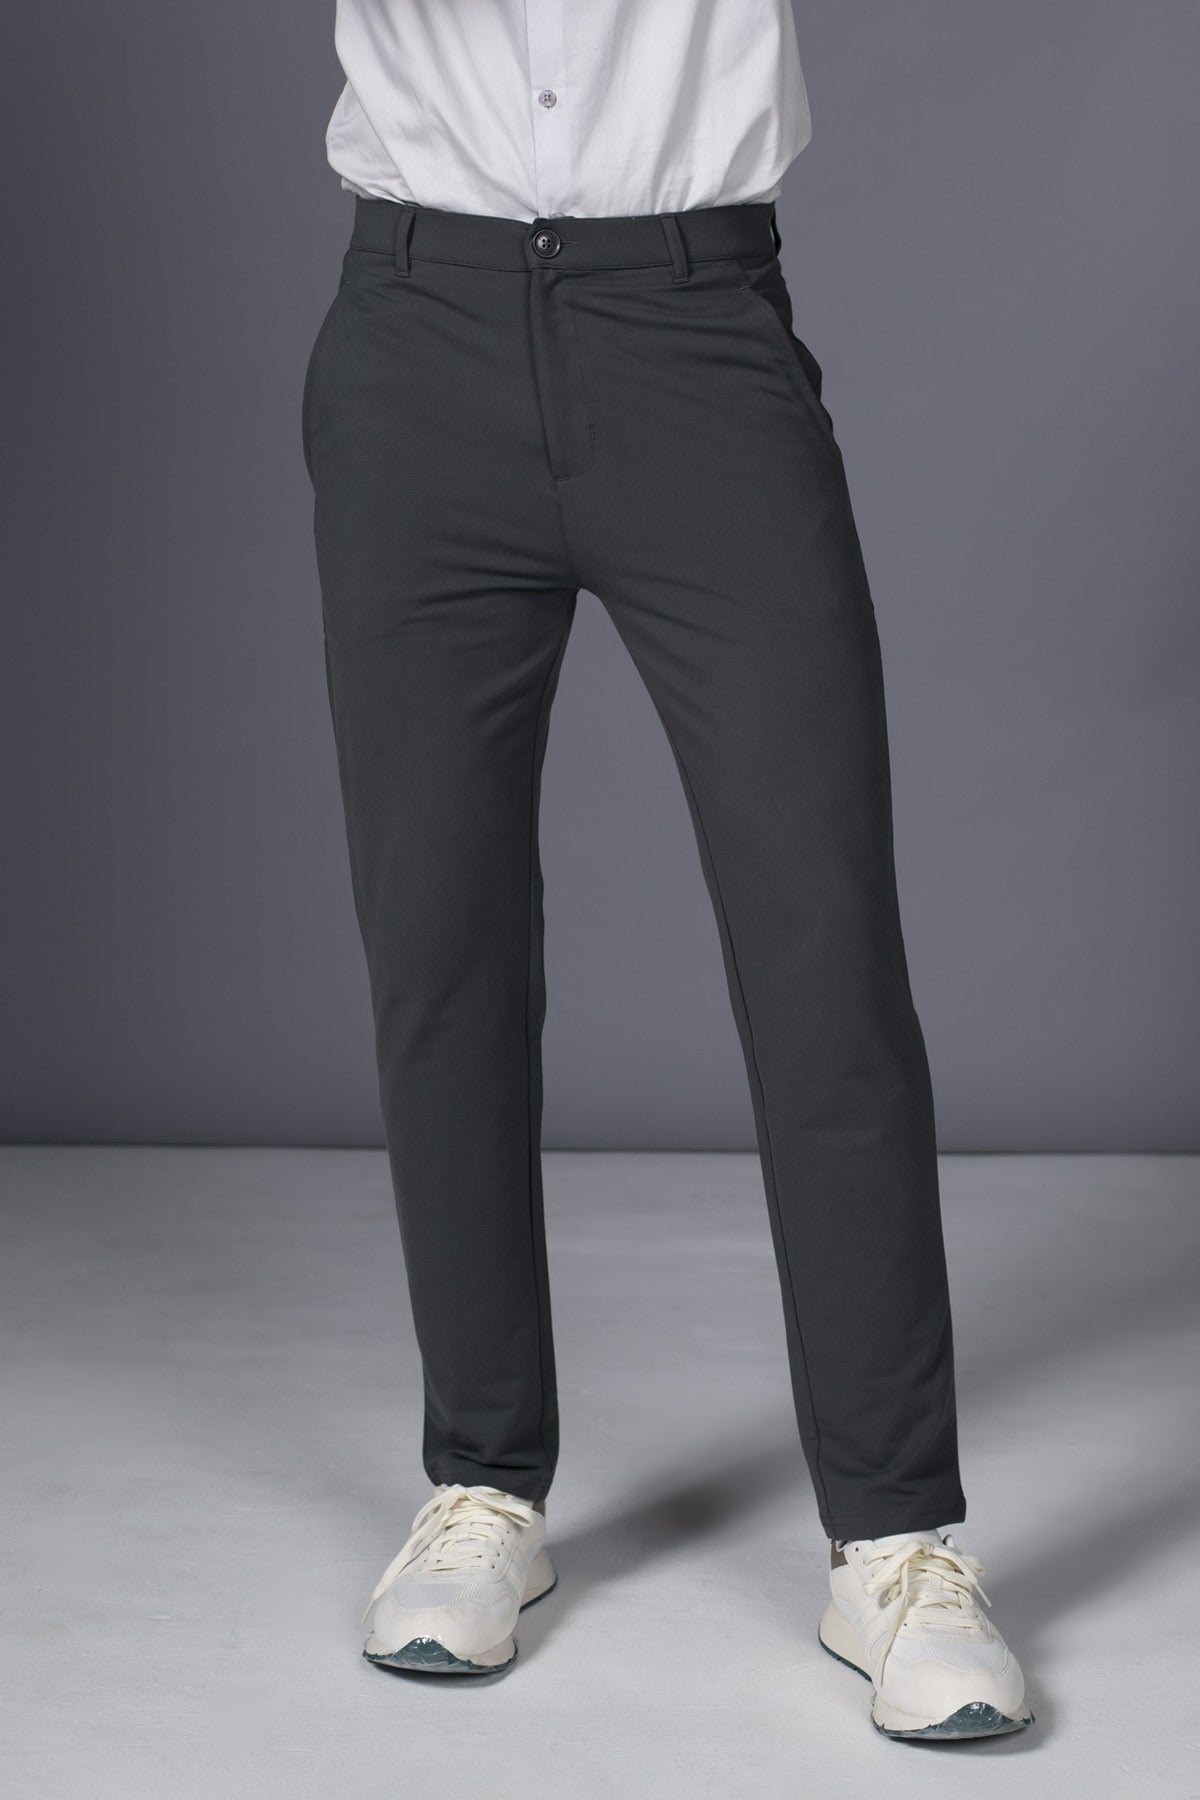 The Alloy Pant Beyours